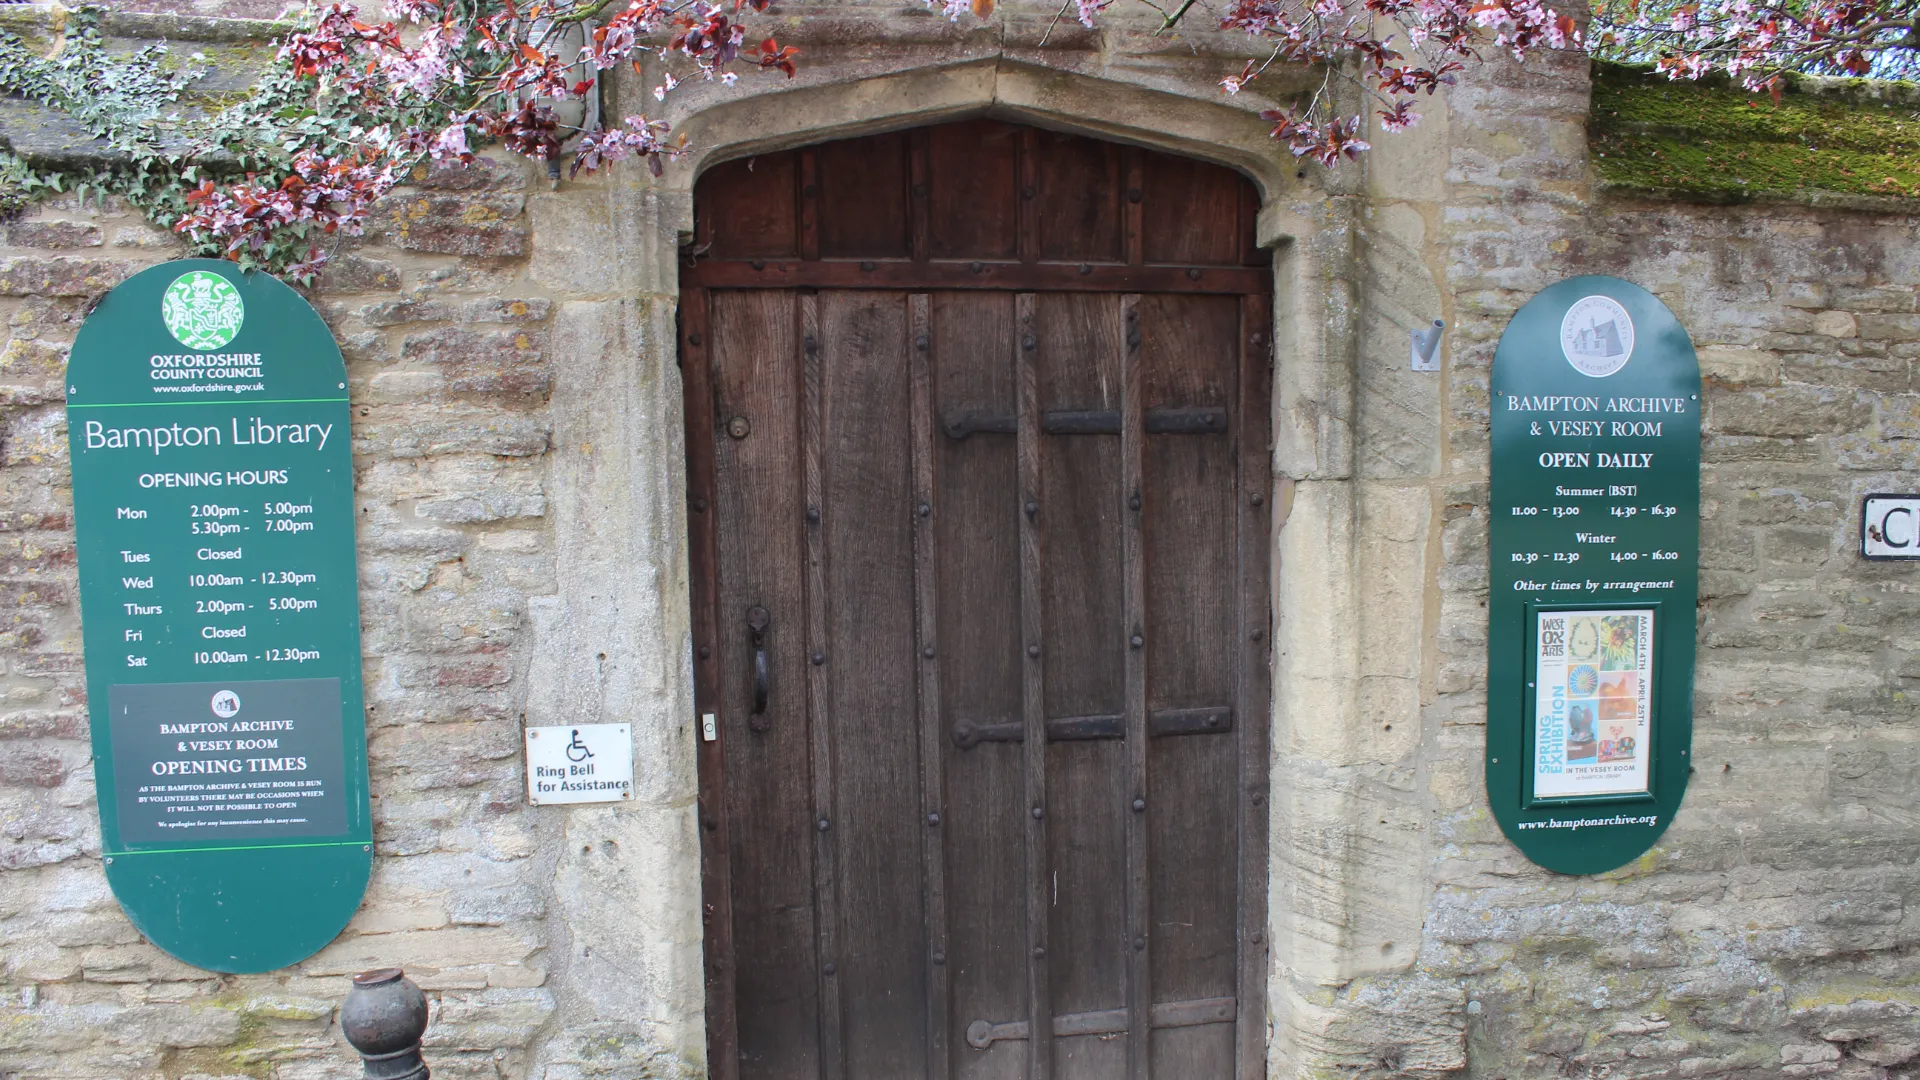 Old wooden door flanked by two informational signs about bampton library and archive, displayed on a stone wall with blooming branches above.